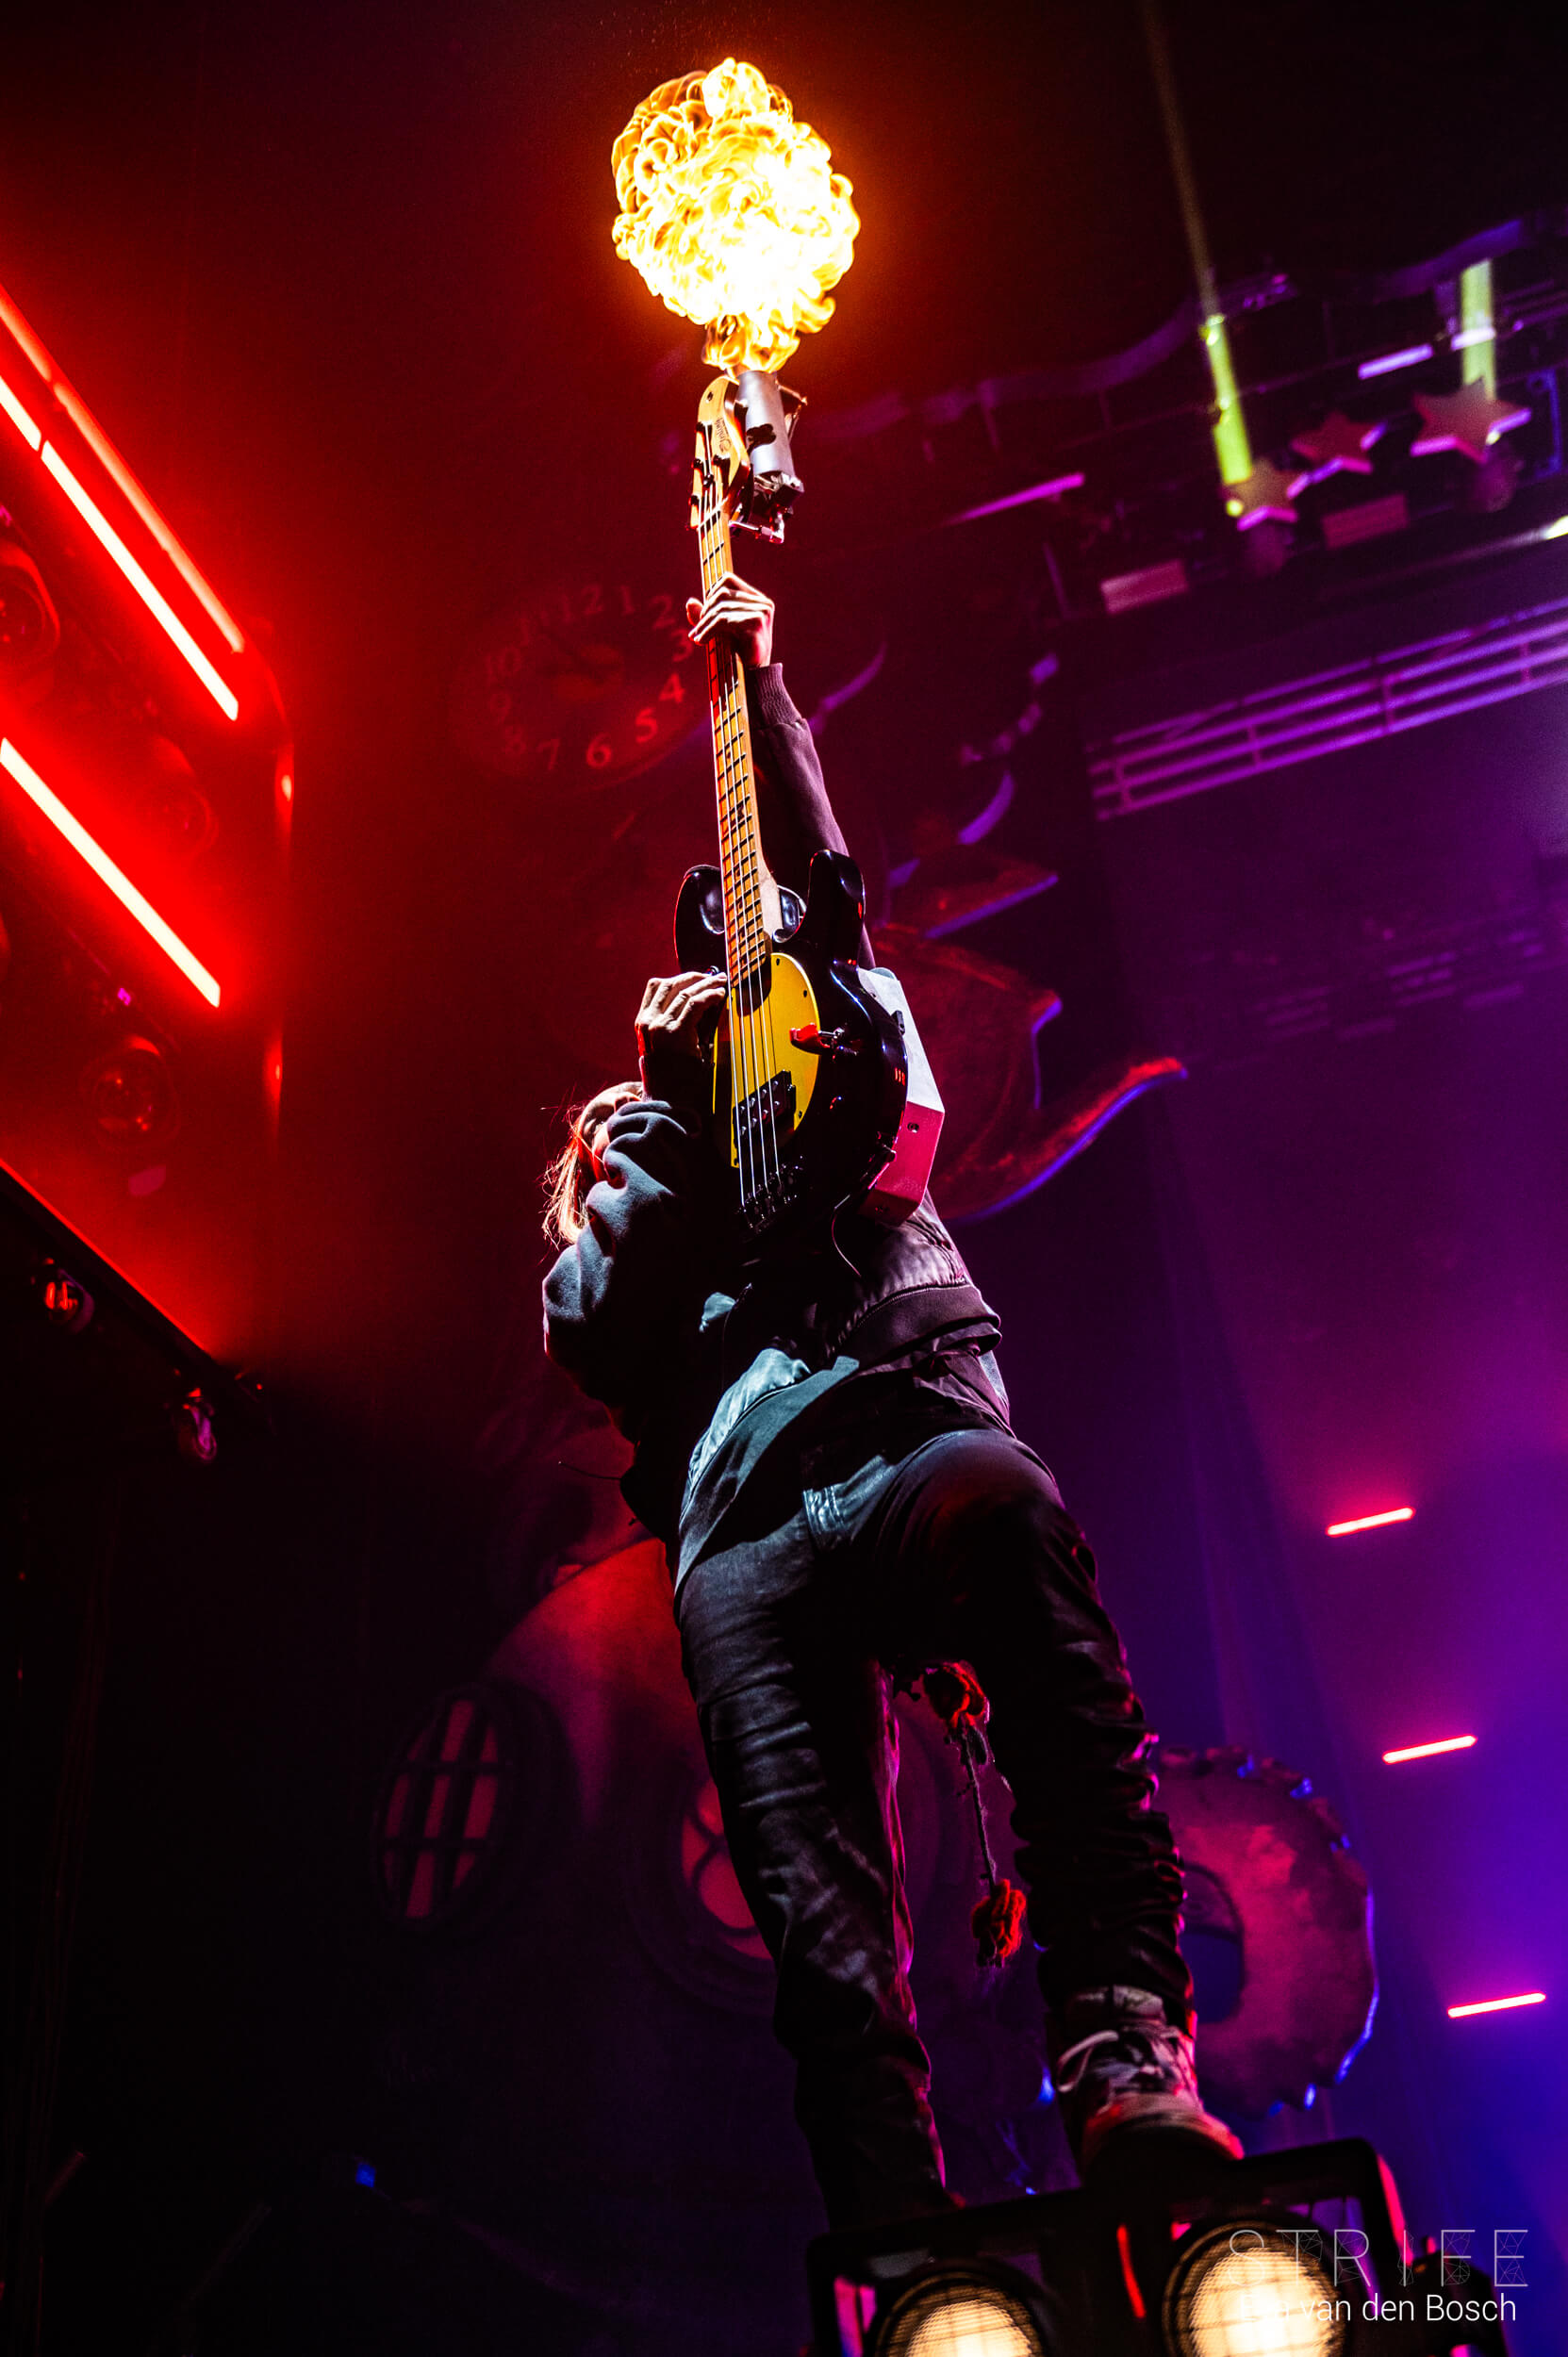 Fall Out Boy @ AFAS Live, Amsterdam